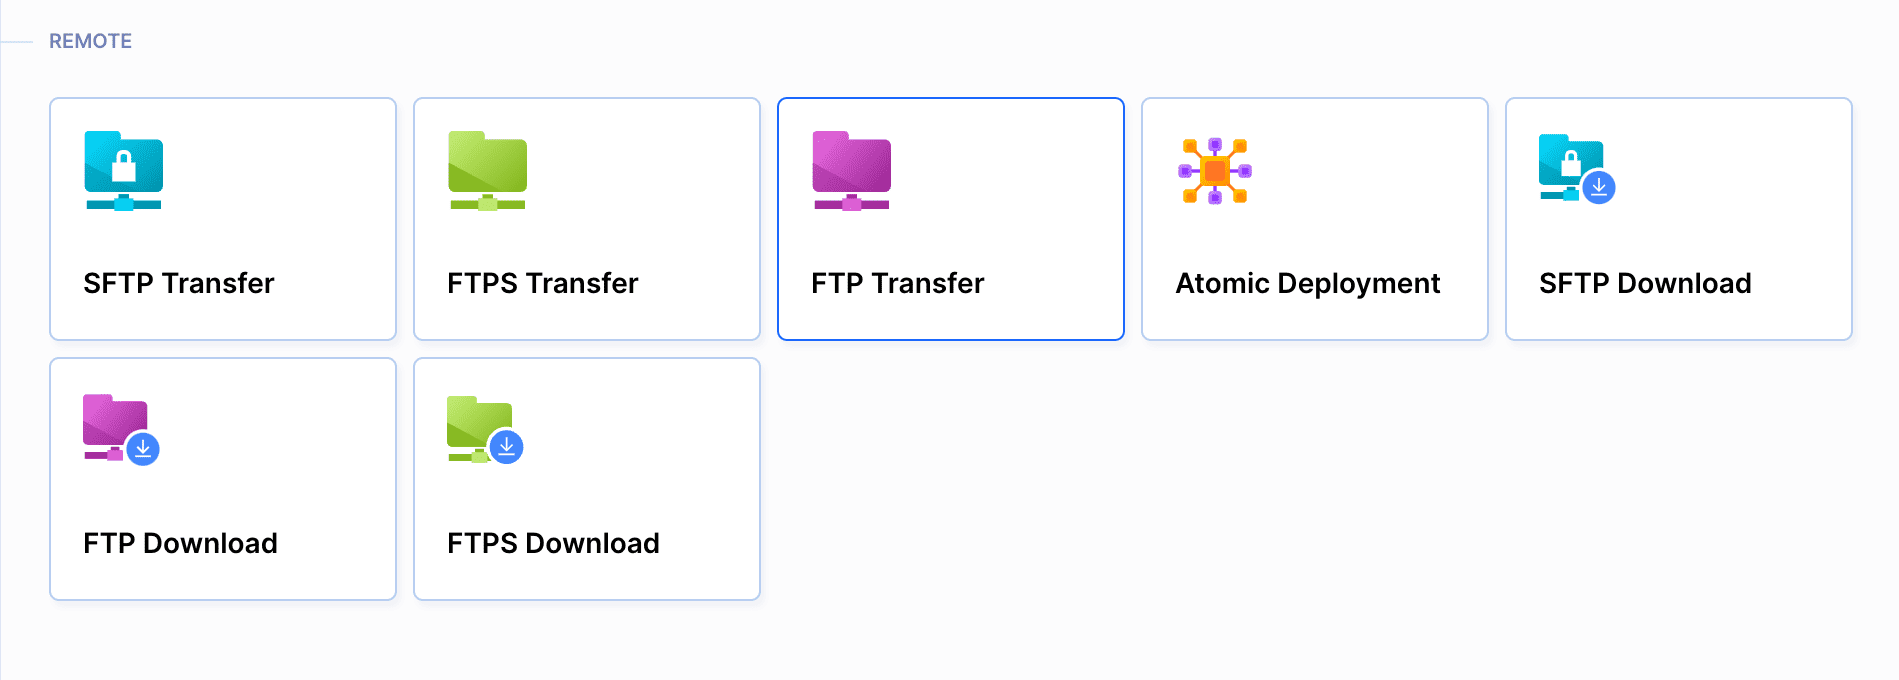 Transfer actions in Buddy